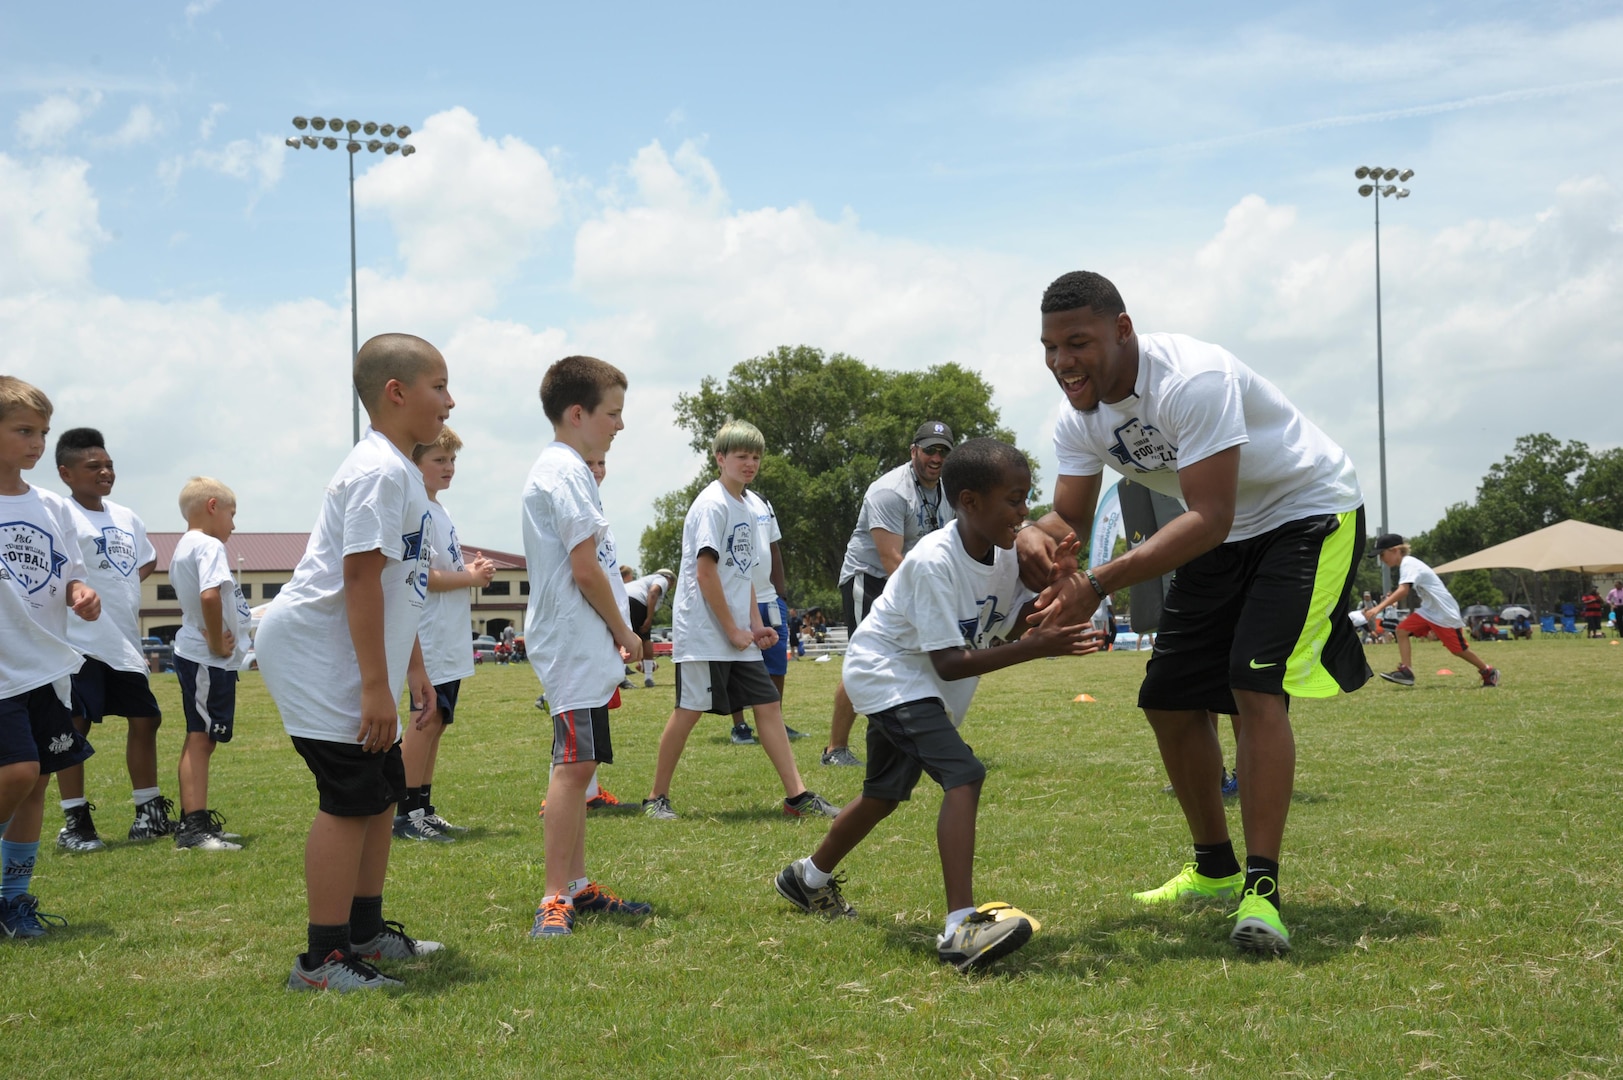 Terrance Williams, Dallas Cowboy wide receiver, instructs children during a youth football camp July 7 at Joint Base San Antonio-Randolph. Throughout the camp, Williams offered tips and instruction, highlighting the finer points of football. Campers experienced various stations specializing in fundamental skills and participated in touch football games. (U.S. Air Force photo by Joel Martinez/Released)